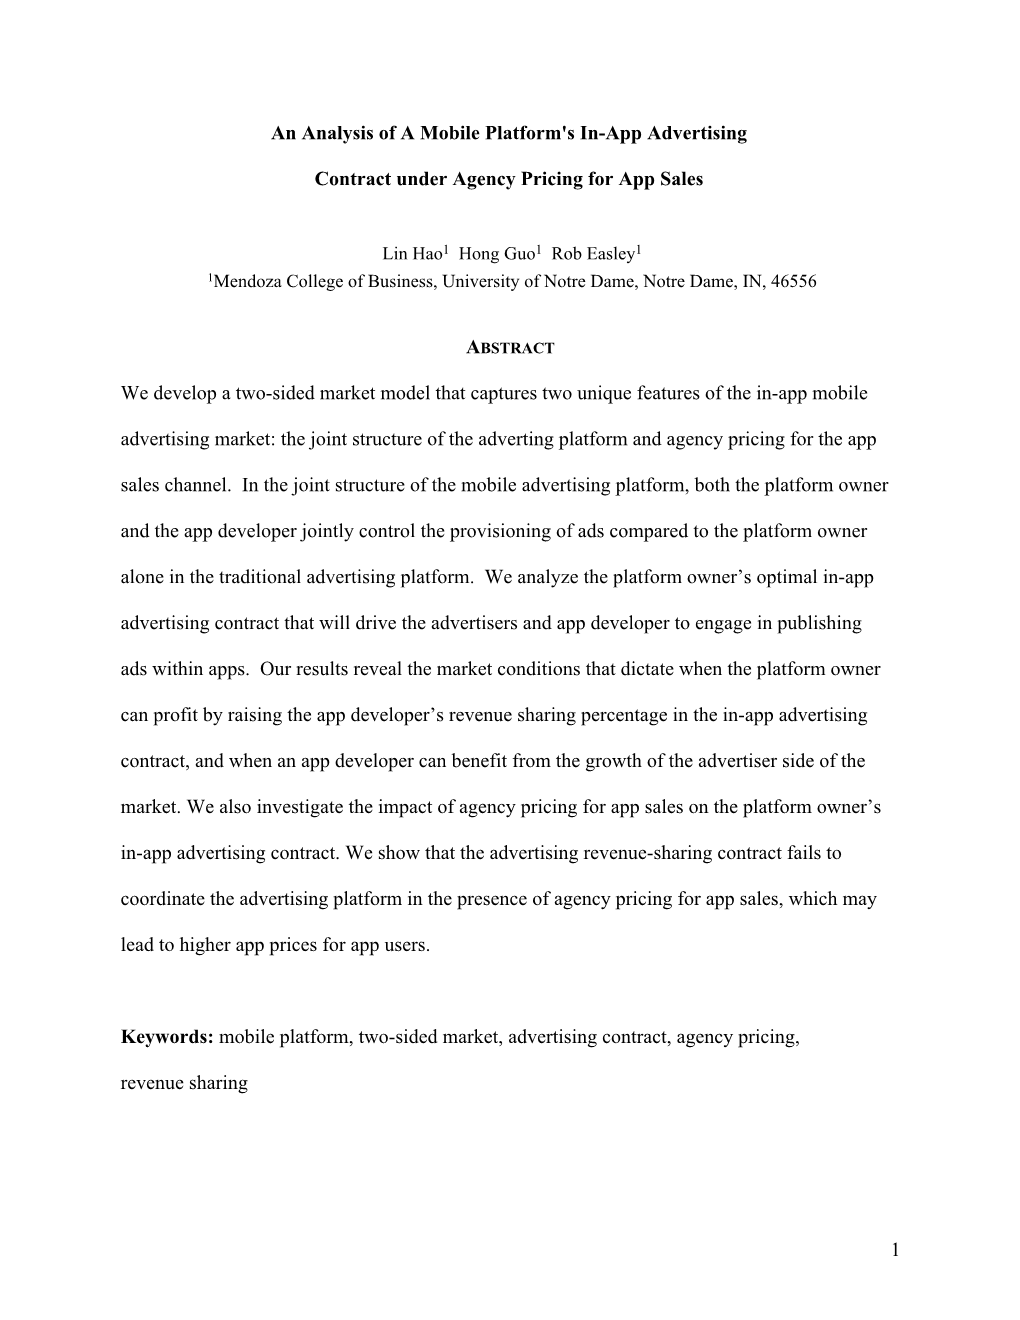 1 an Analysis of a Mobile Platform's In-App Advertising Contract Under